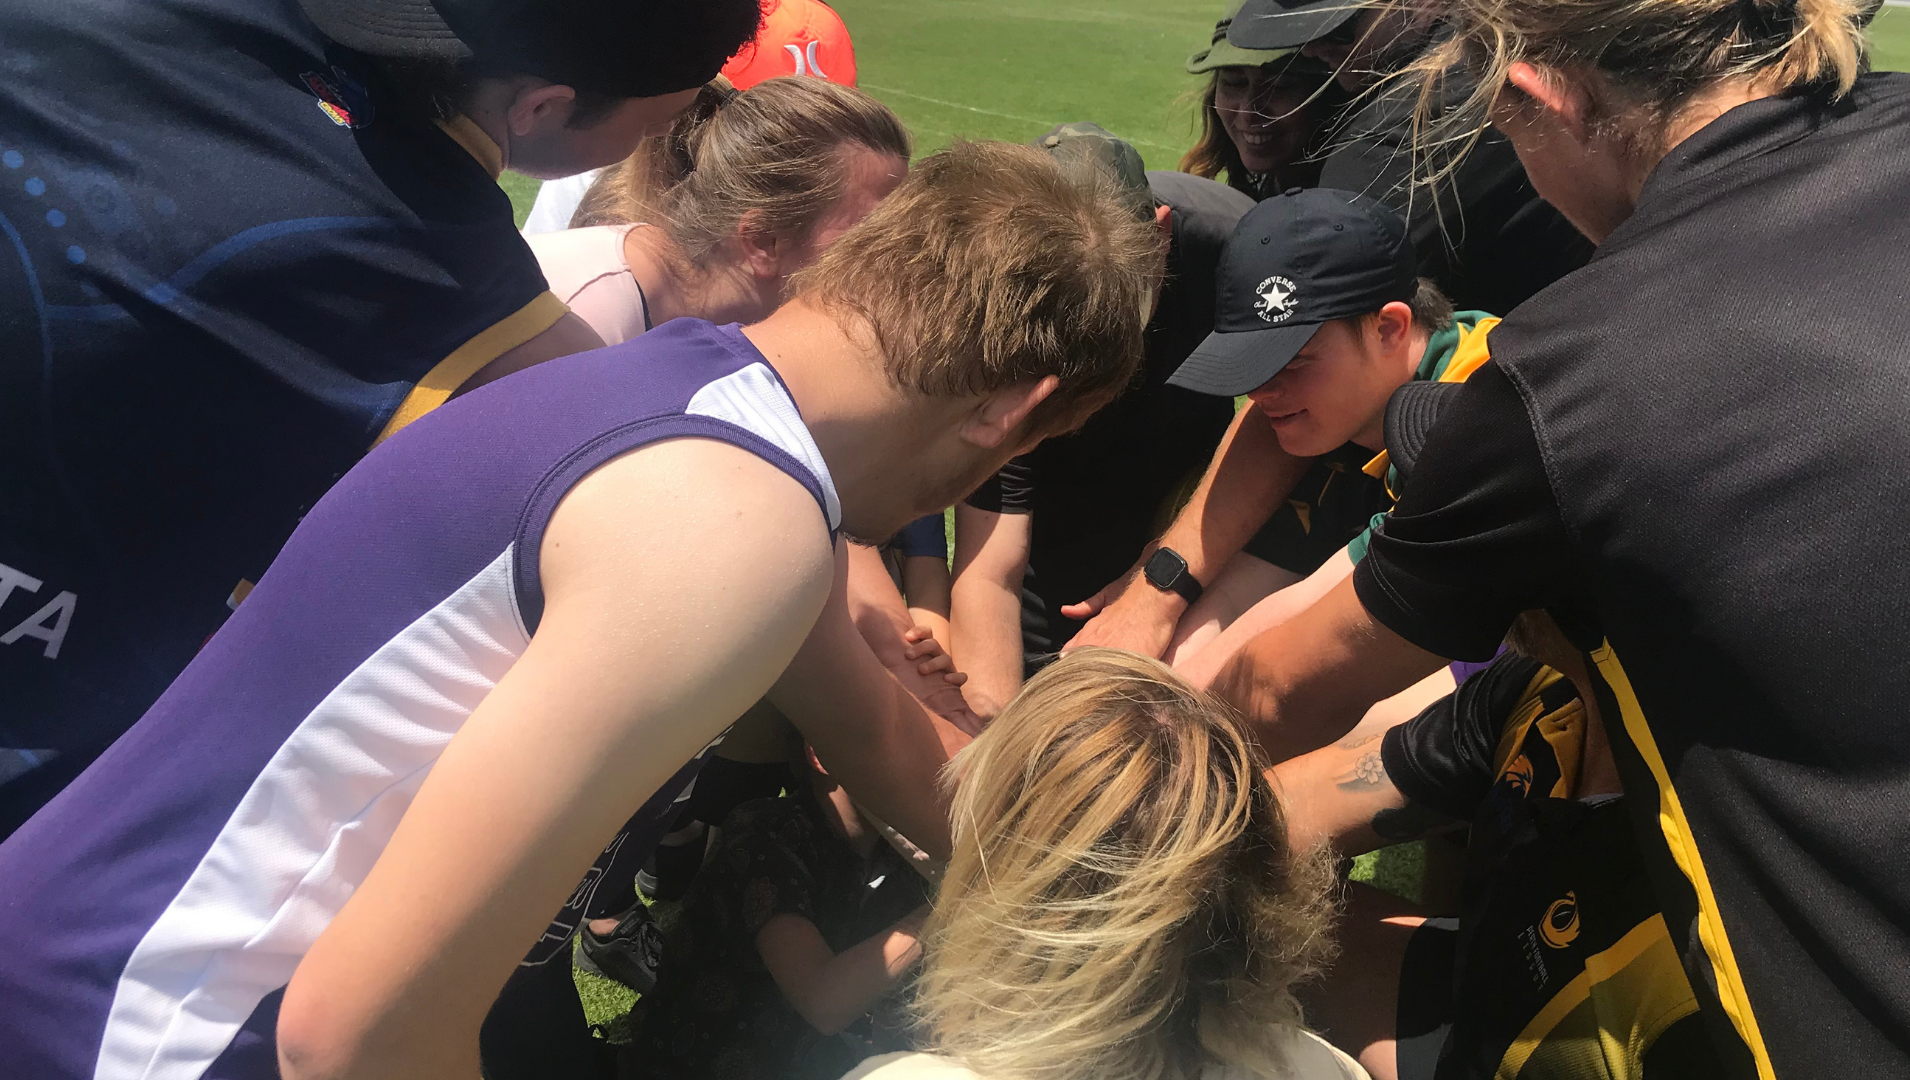 A group of participants from the footy open day in a team huddle on the oval